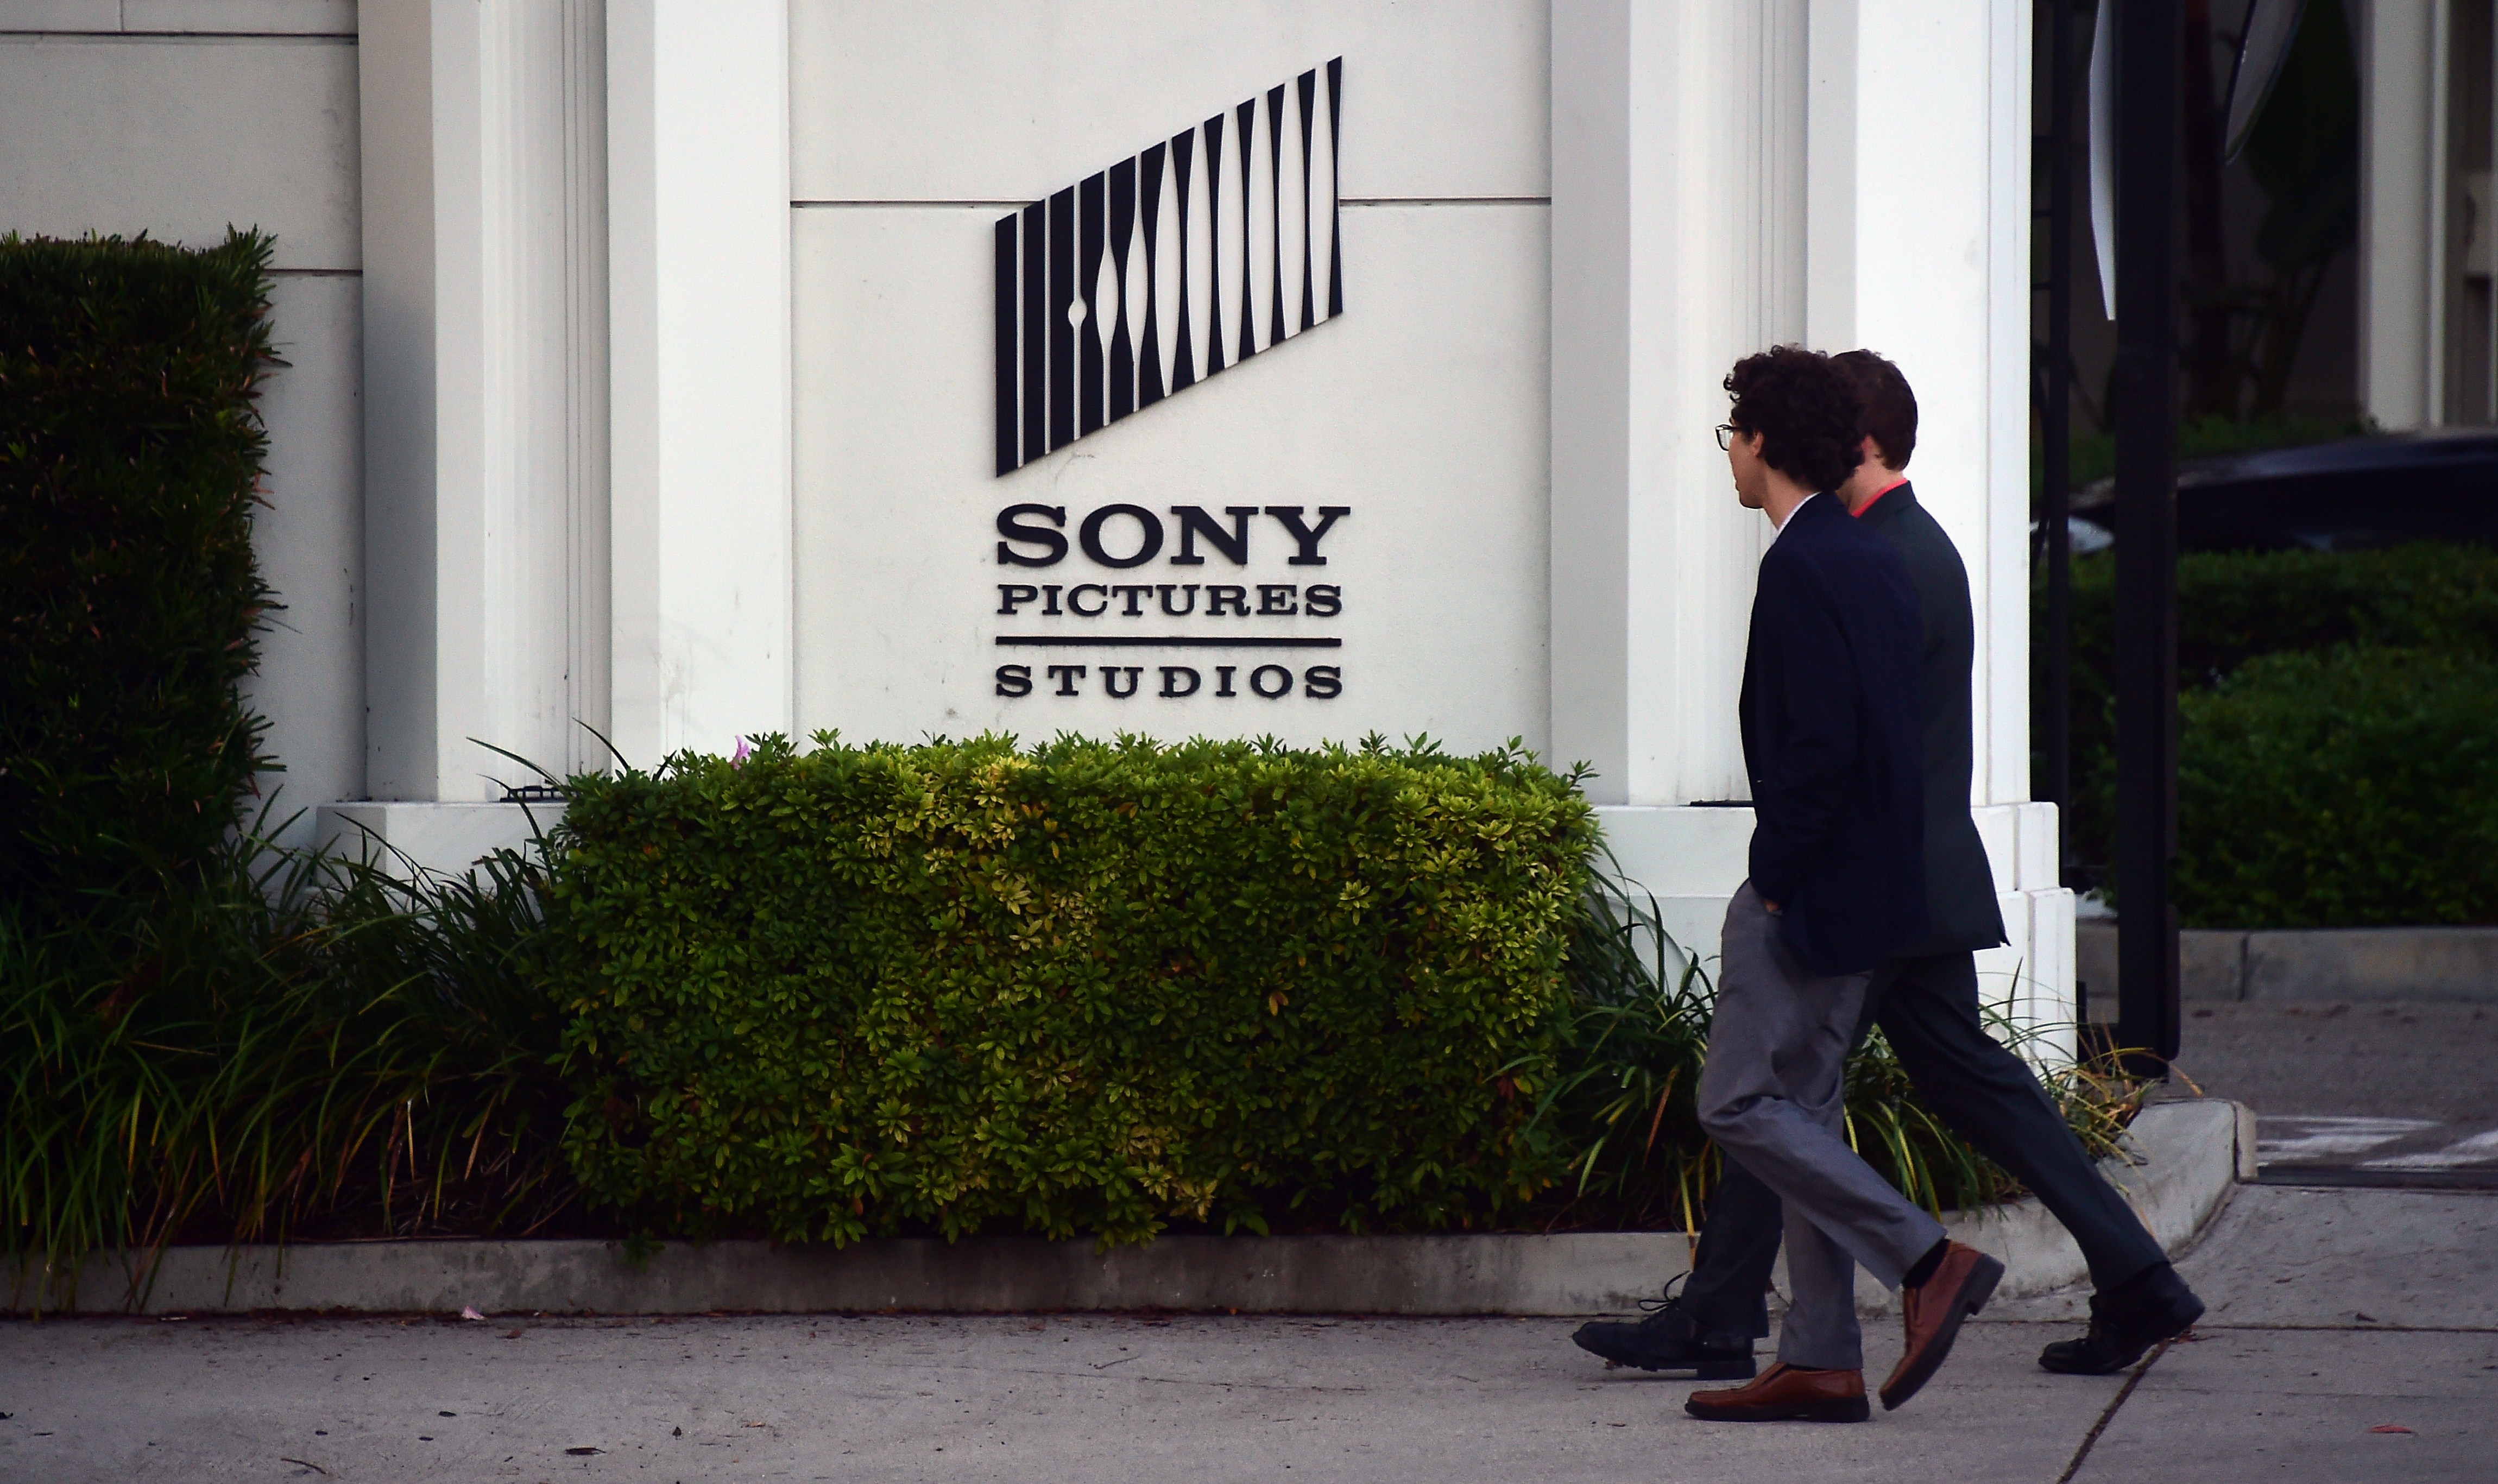 Sony Pictures Studios in Los Angeles on Dec. 4, 2014. (Frederic J. Brown—AFP/Getty Images)